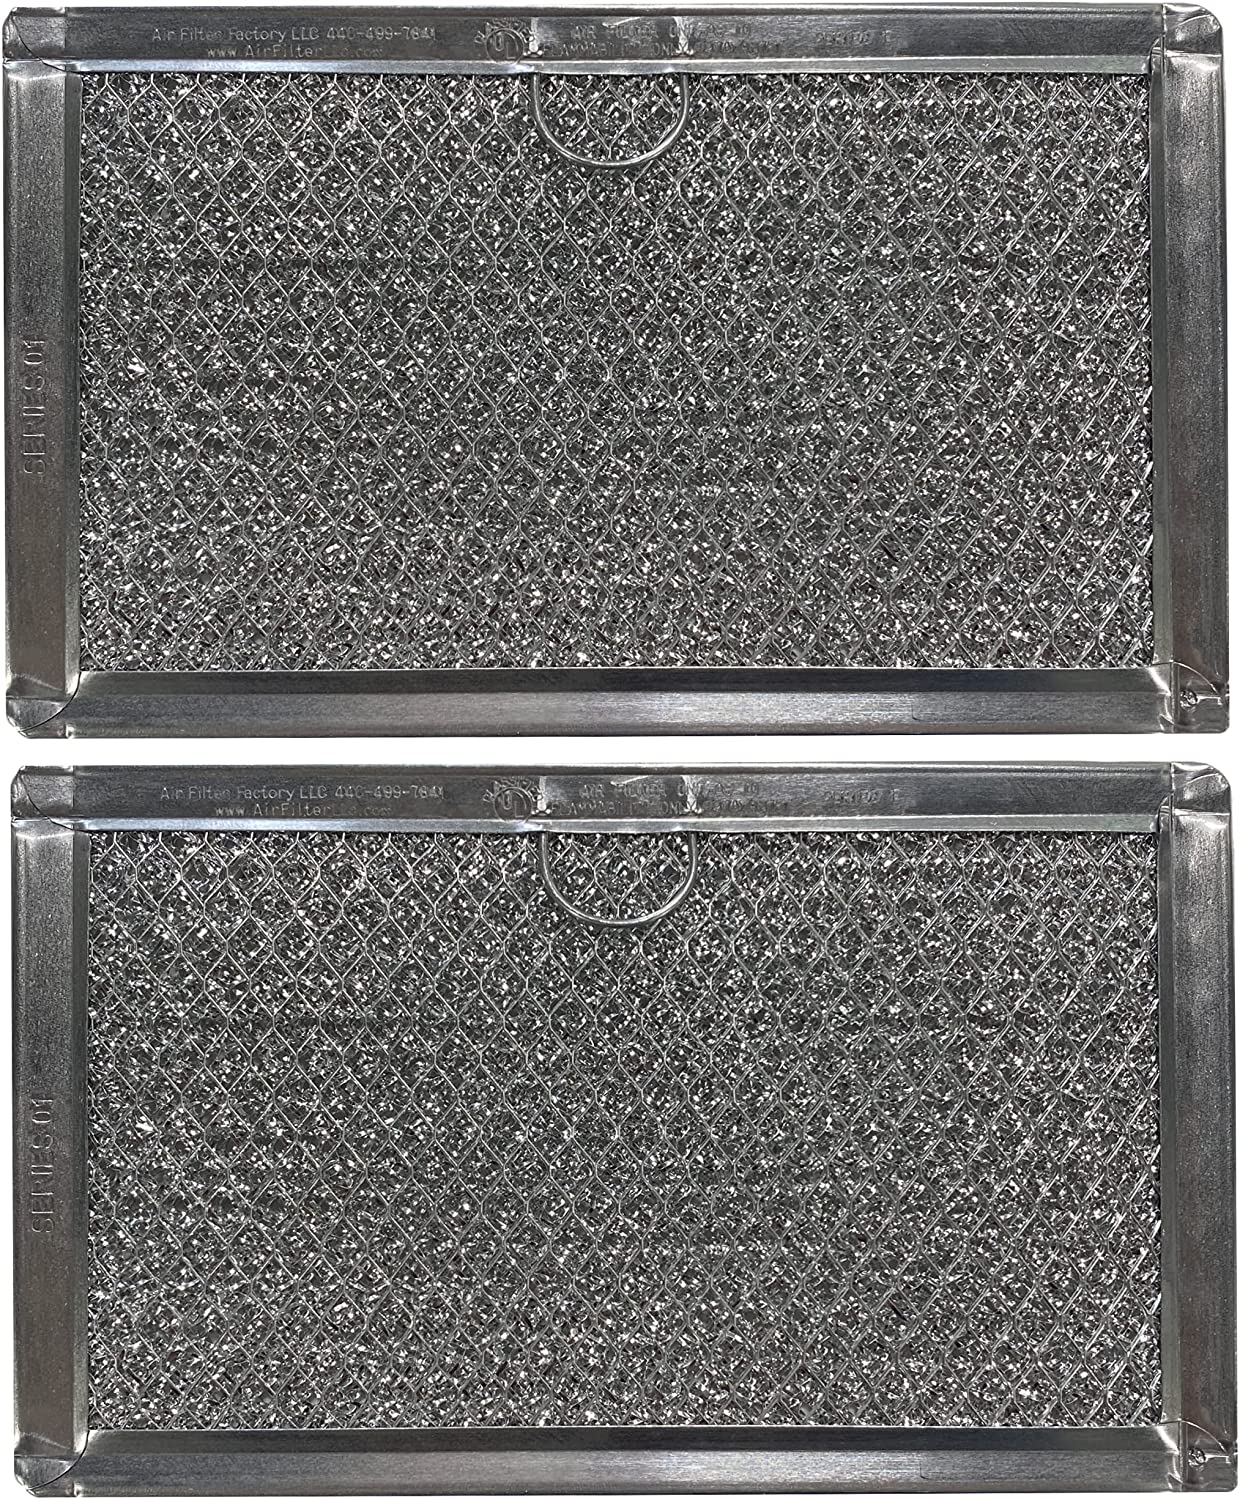 2-PACK Grease Filter Replacement for Frigidaire 5304478913 